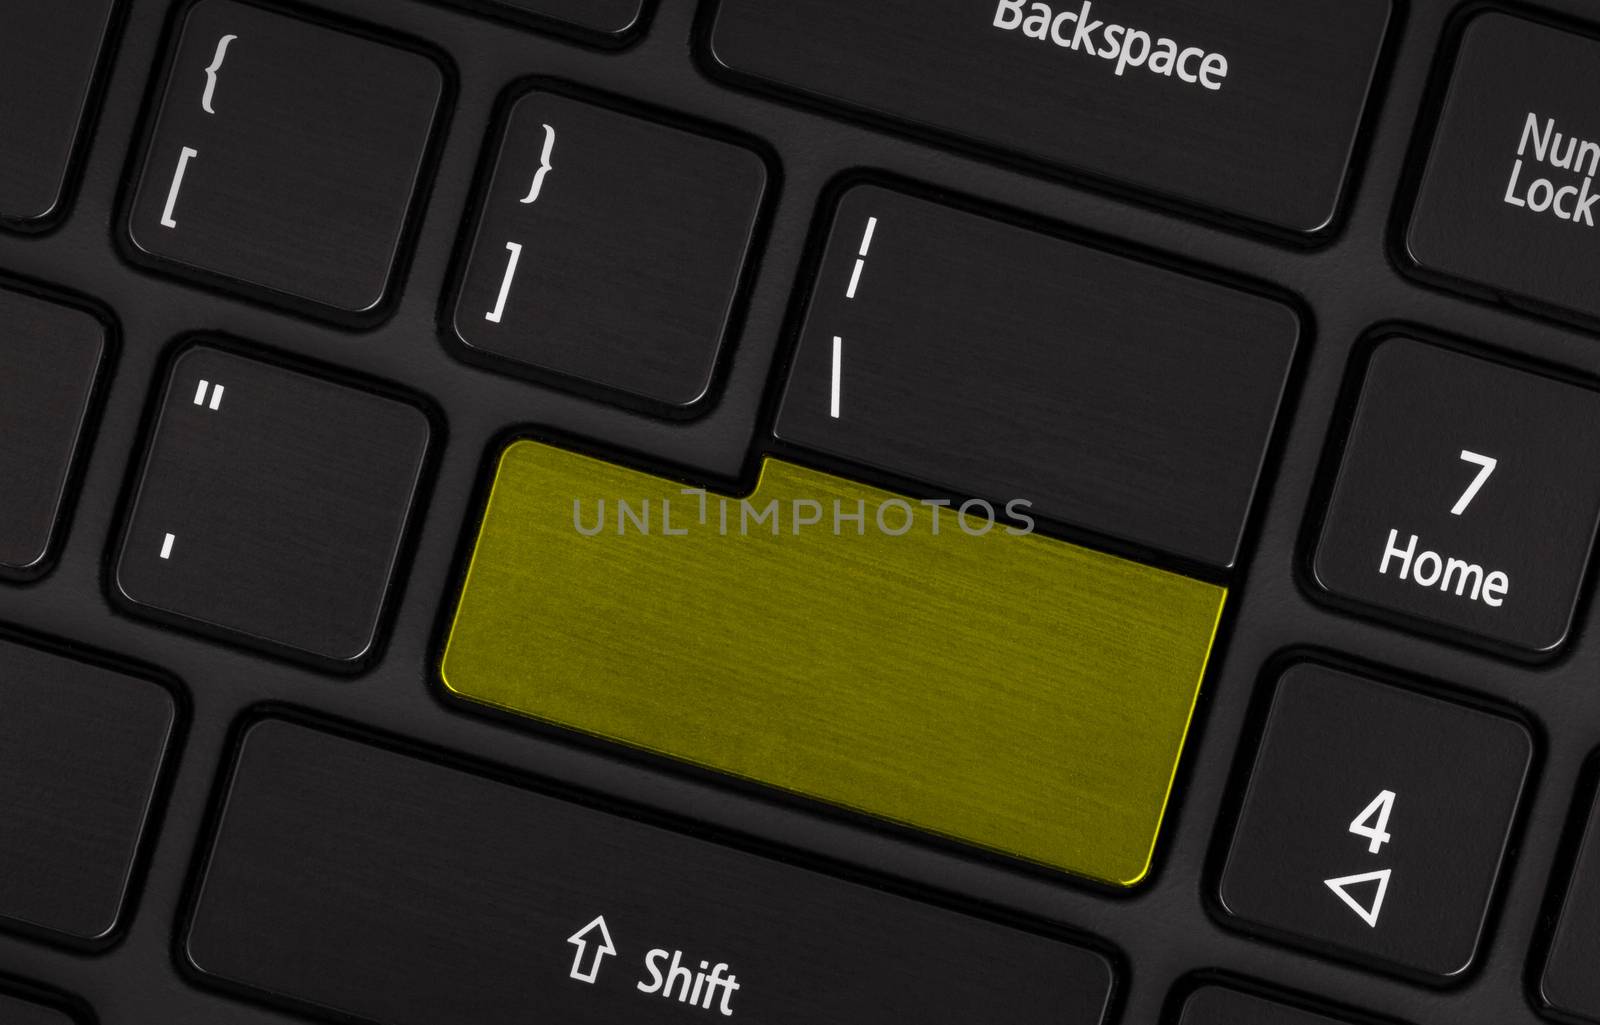 Laptop computer keyboard with blank yellow button for text